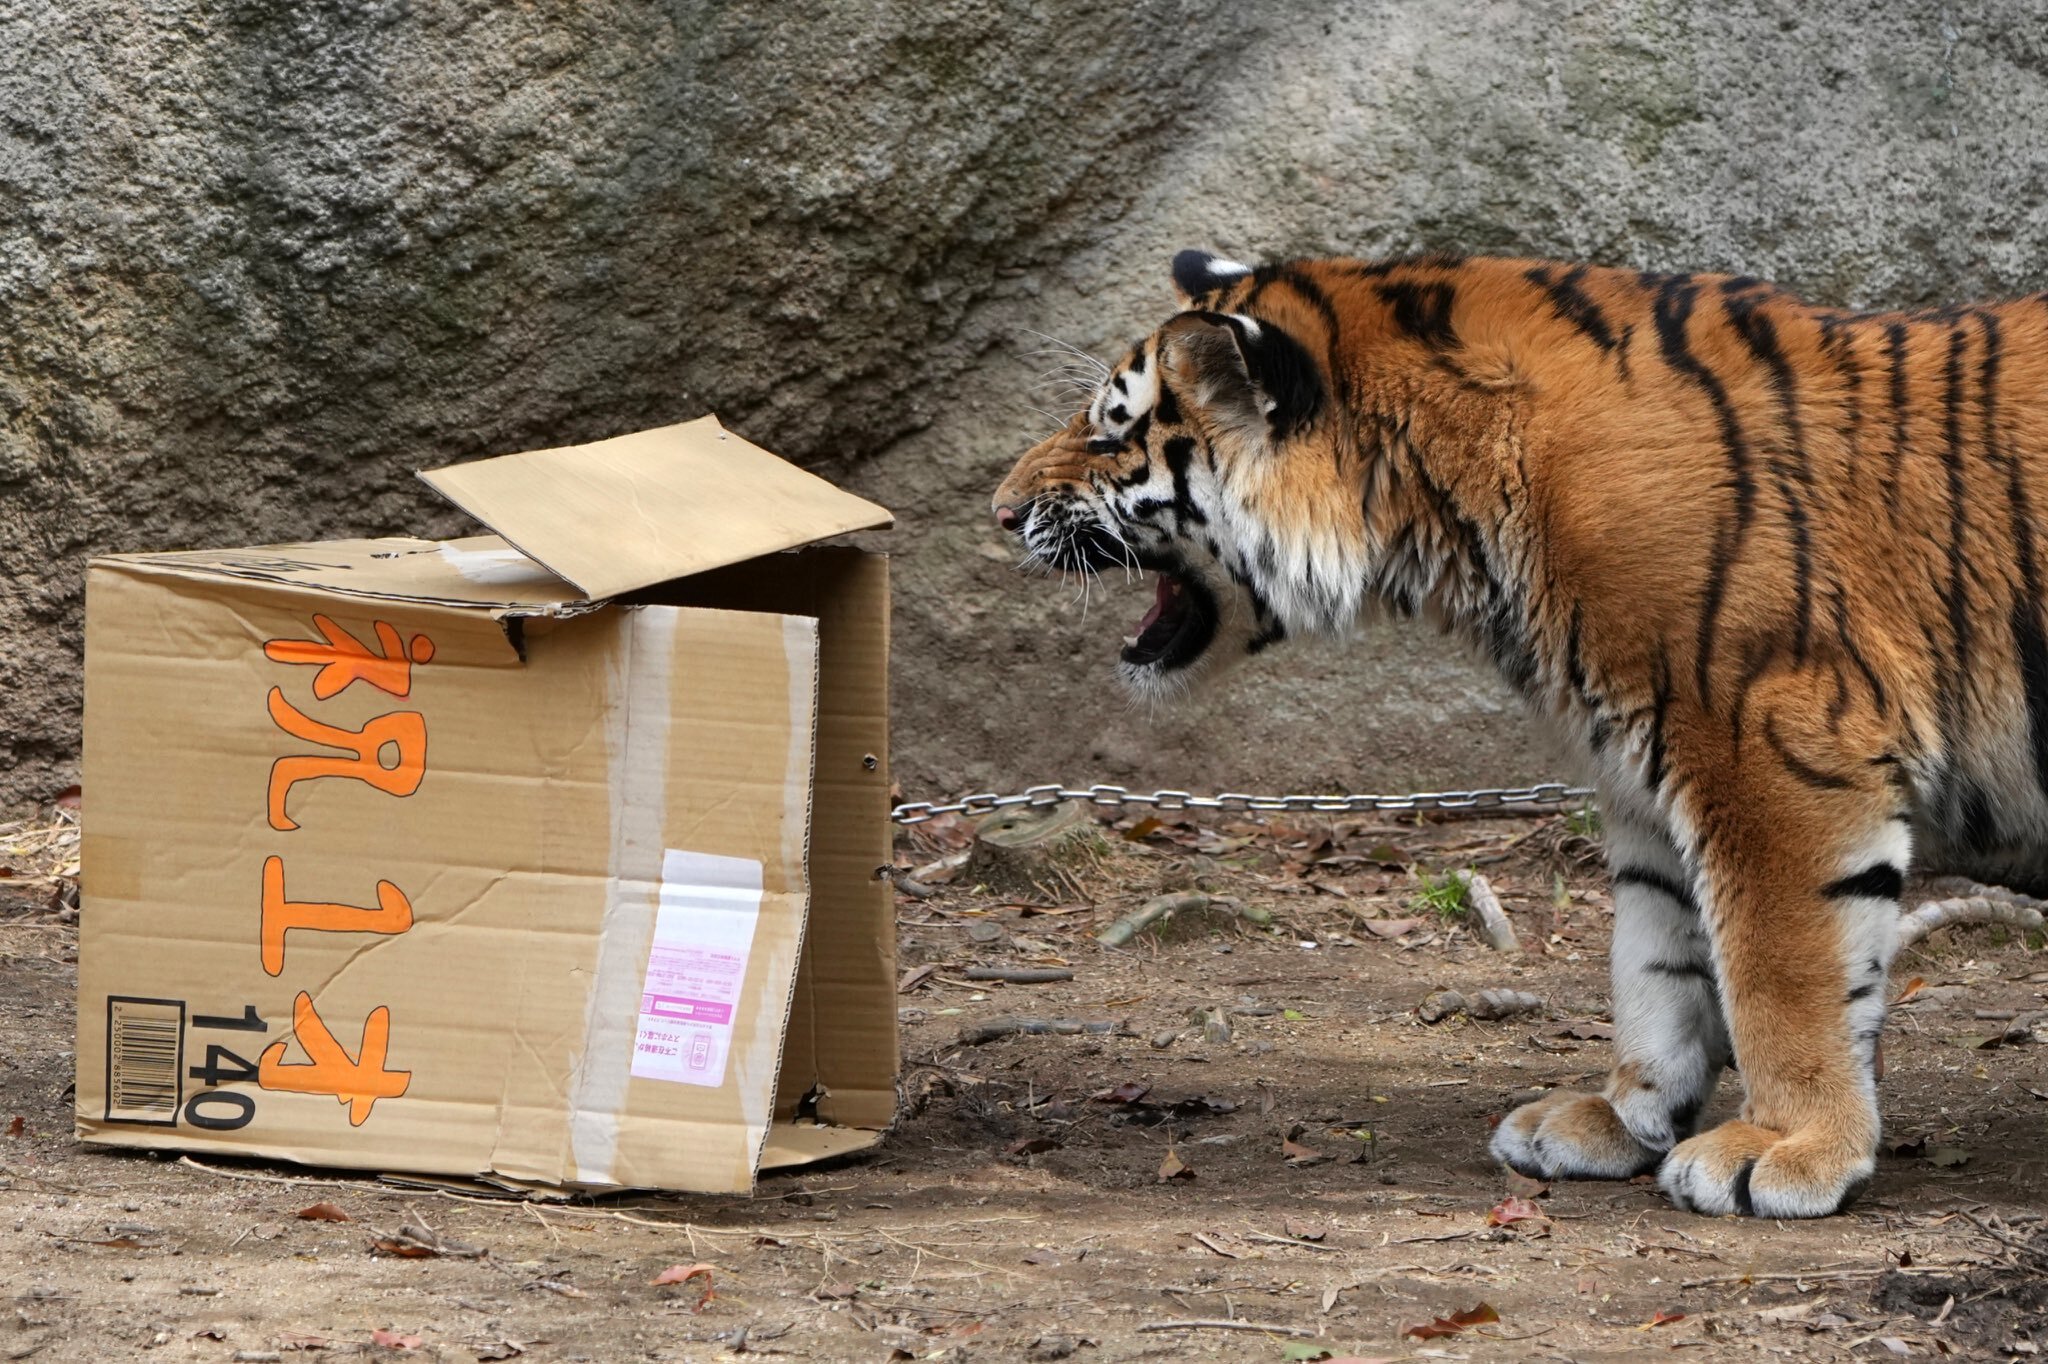 Where did the boxes come from? Questionably... - Tiger, Amur tiger, Tiger cubs, Big cats, Cat family, Wild animals, Predatory animals, Milota, Zoo, Shizuoka, Honshu, Japan, Positive, Redheads, Longpost, Box, 